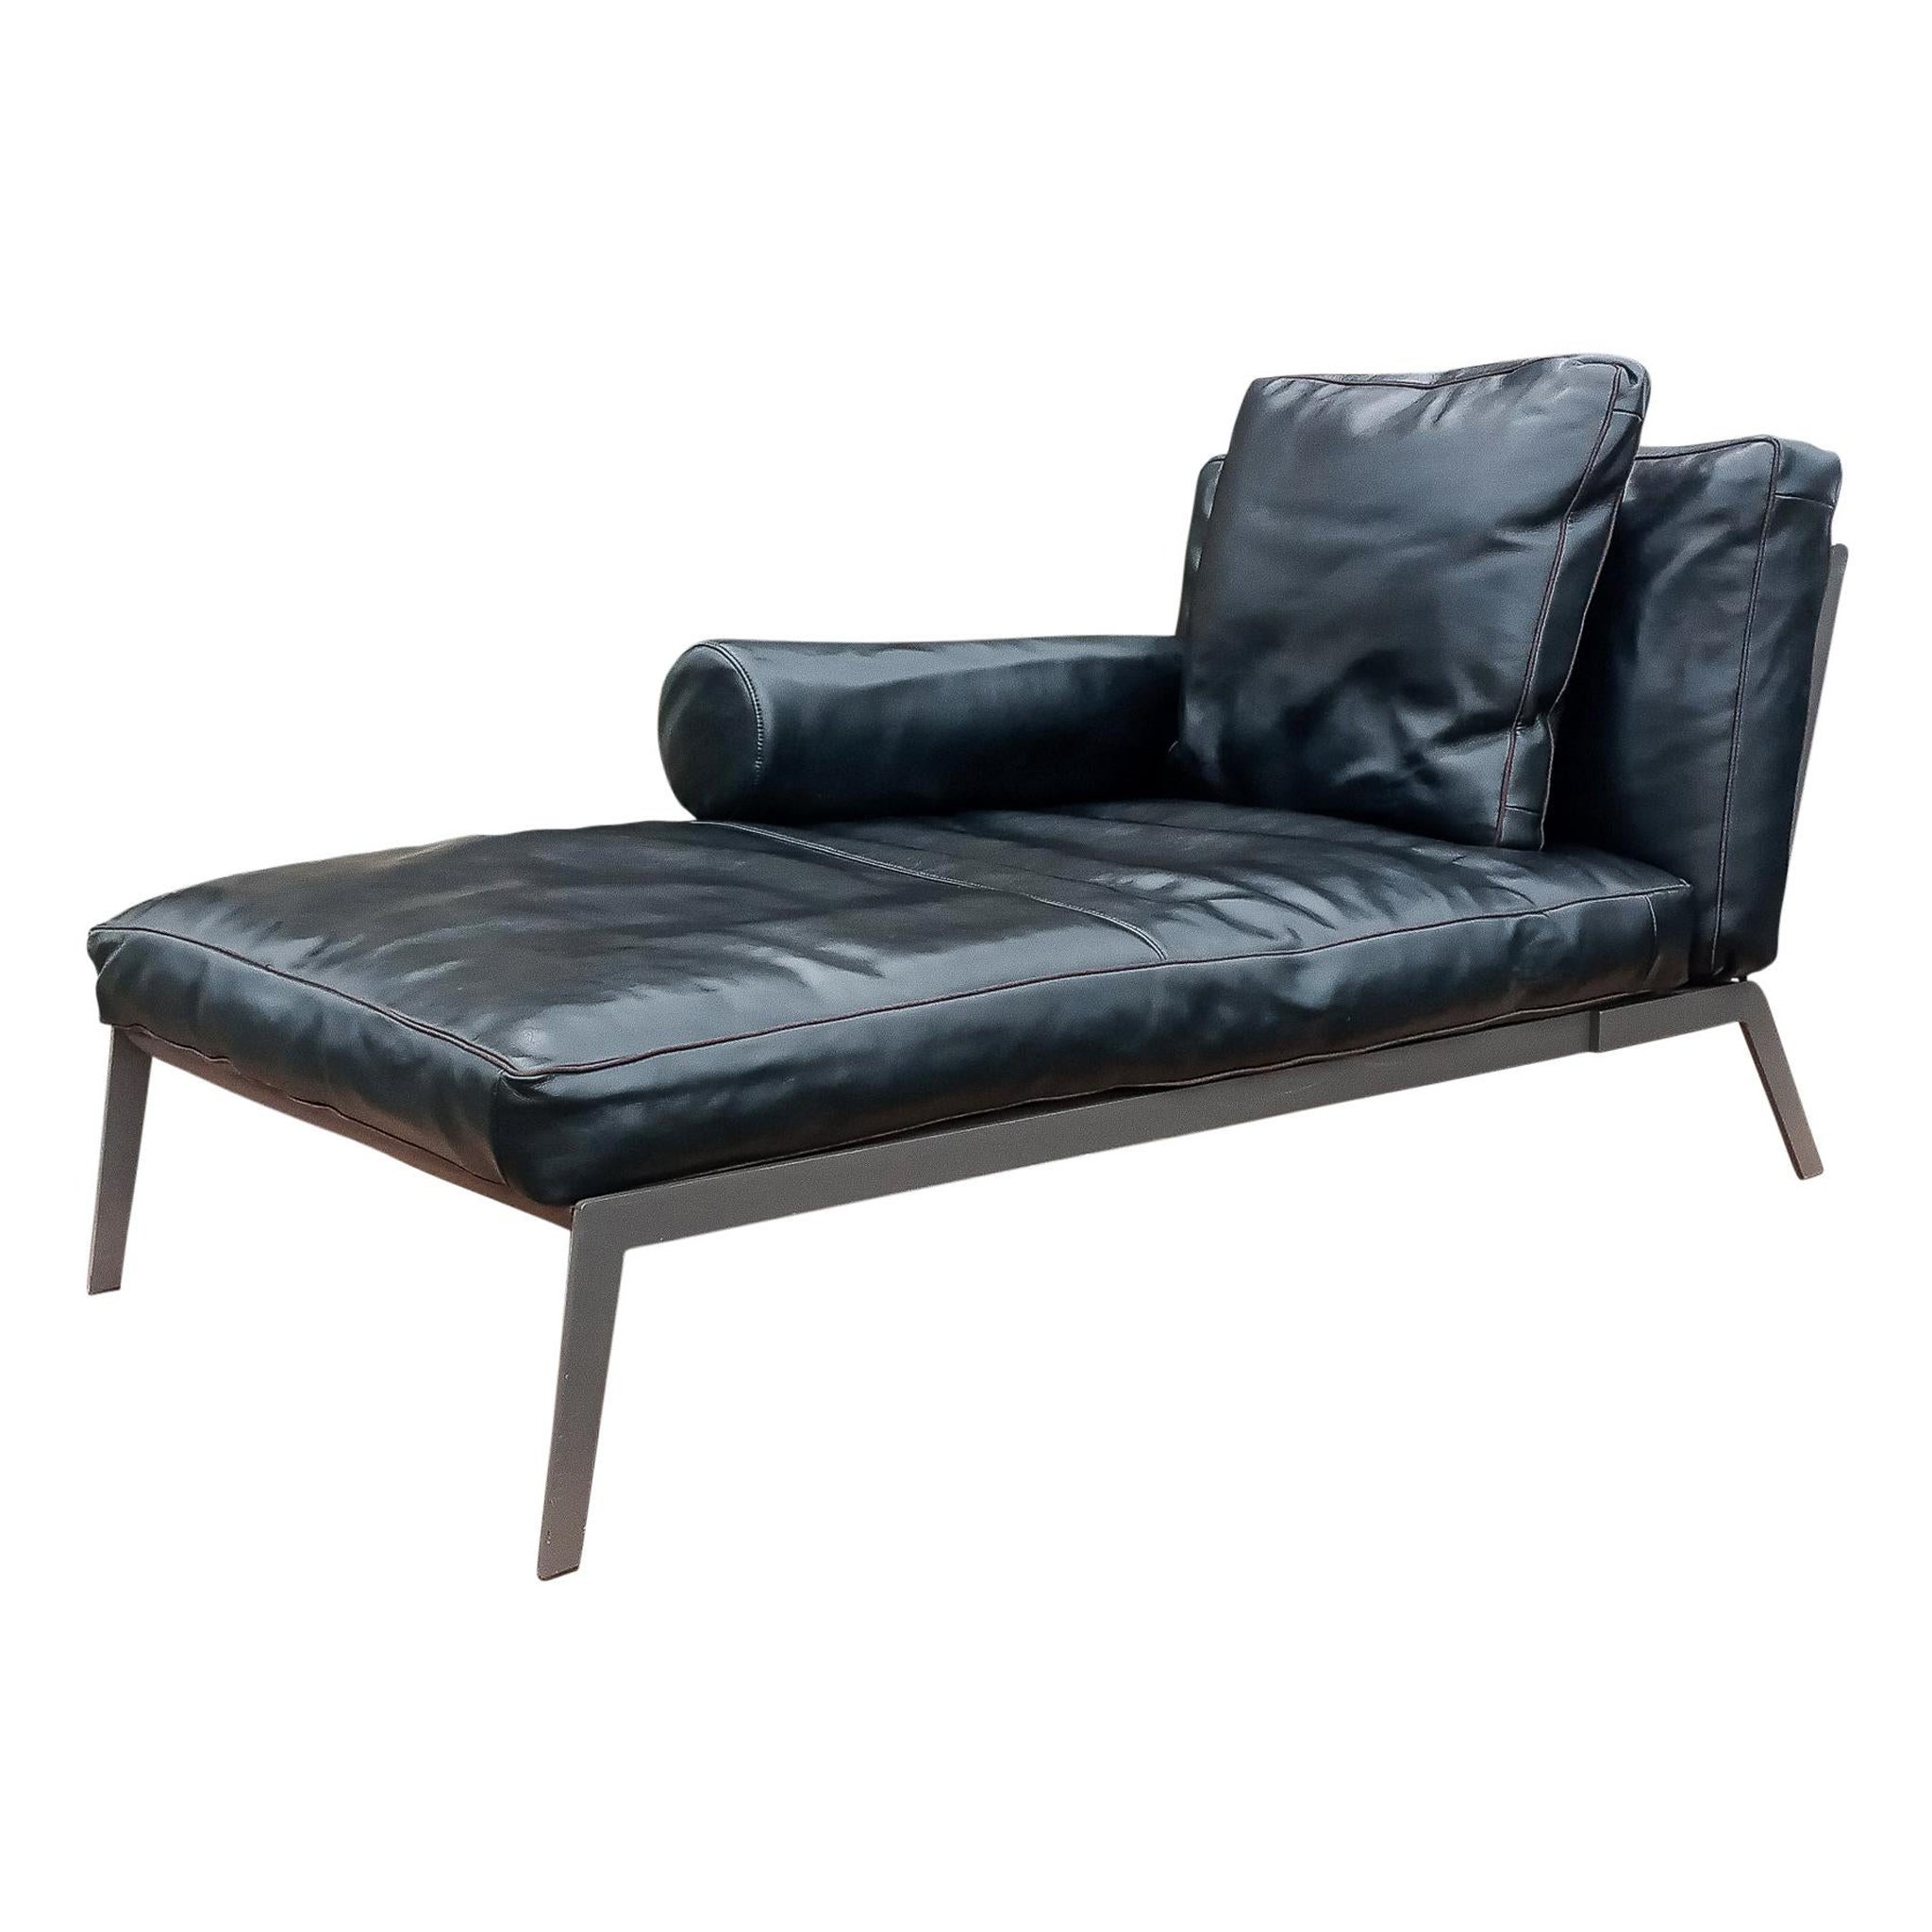 Antonio Citterio for Flexform, Italian Post Modern Leather Chaise Daybed Signed